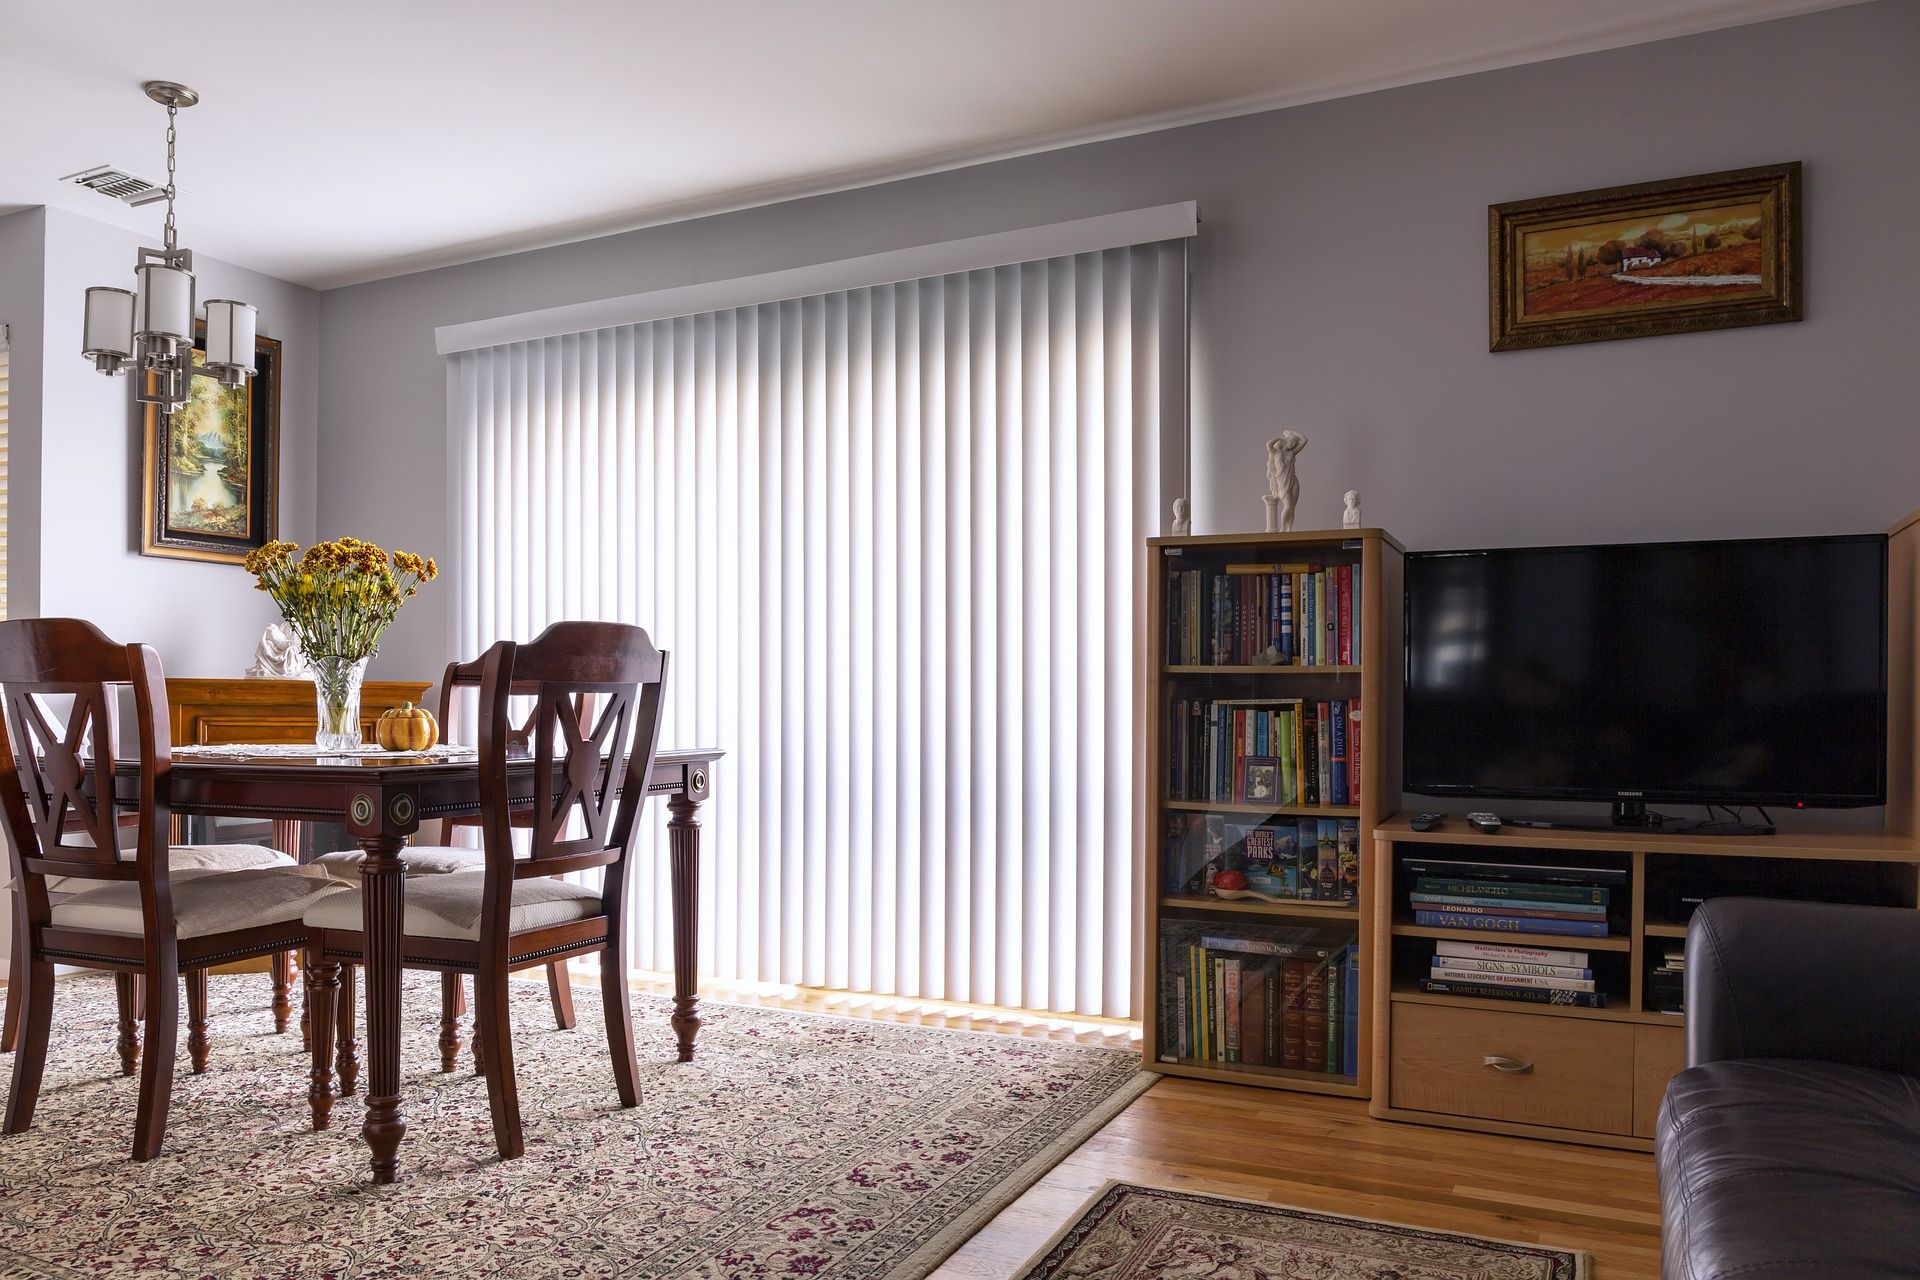 A Helpful Guide For Finding The Perfect Window Treatment